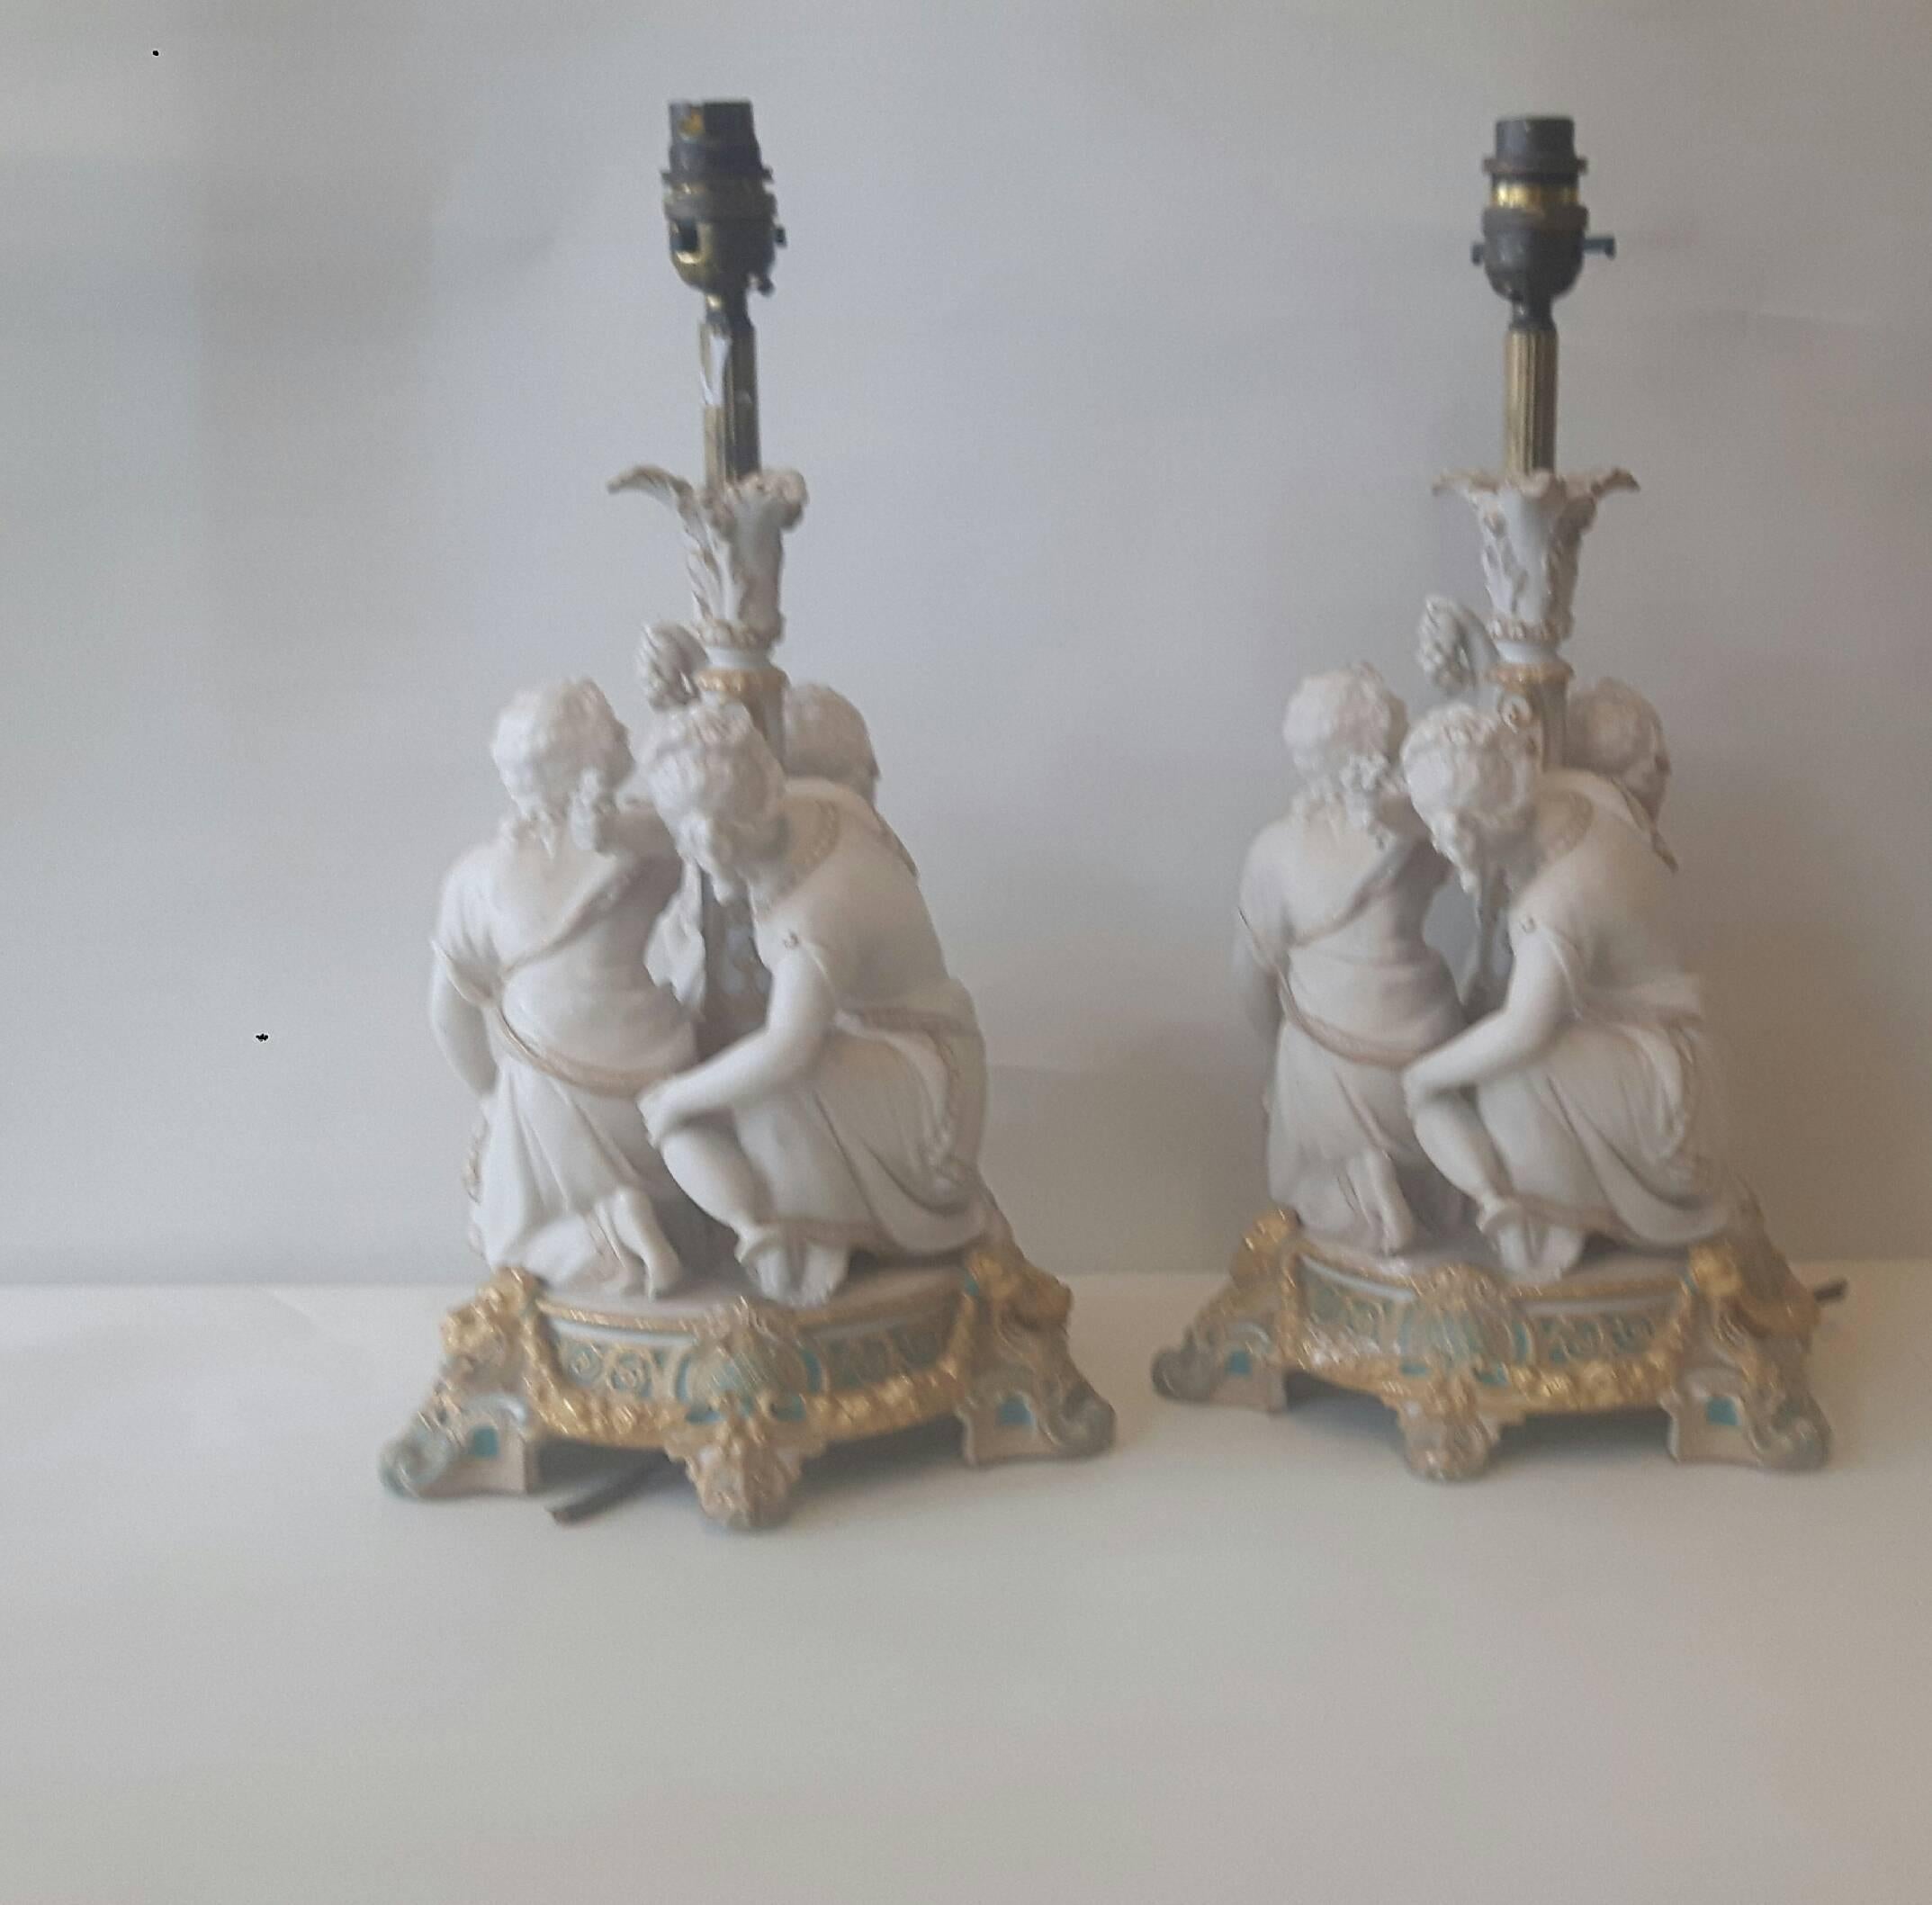 A very elegant pair of lamps, English, probably Copeland or Minton, in the French manner, Parian ware (unglazed porcelain). The group reminds one of summer, where two figures are eating grapes and another is holding a garland of flowers.
The group